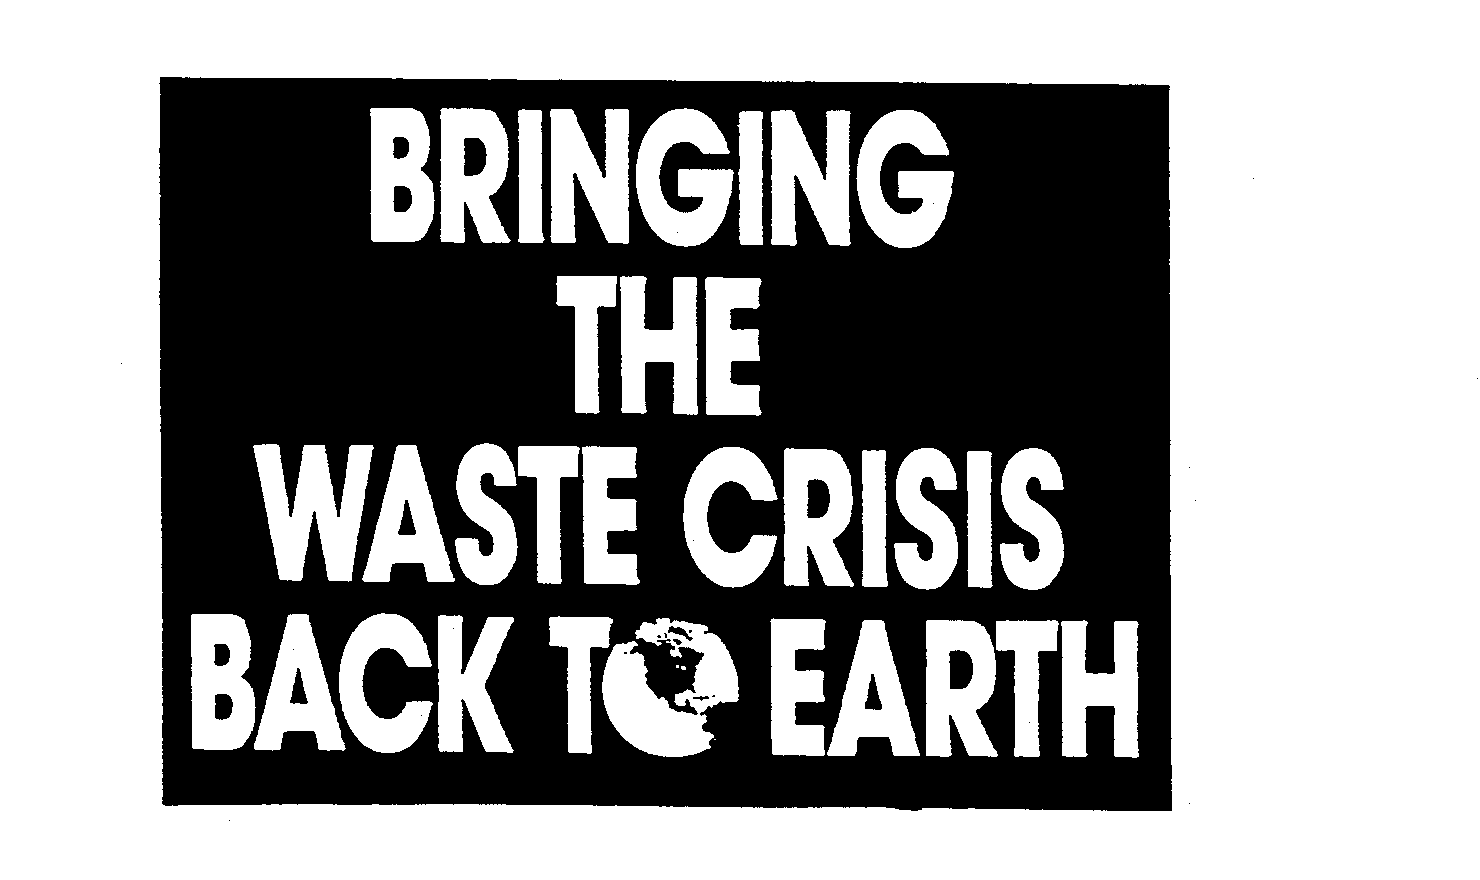  BRINGING THE WASTE CRISIS BACK TO EARTH